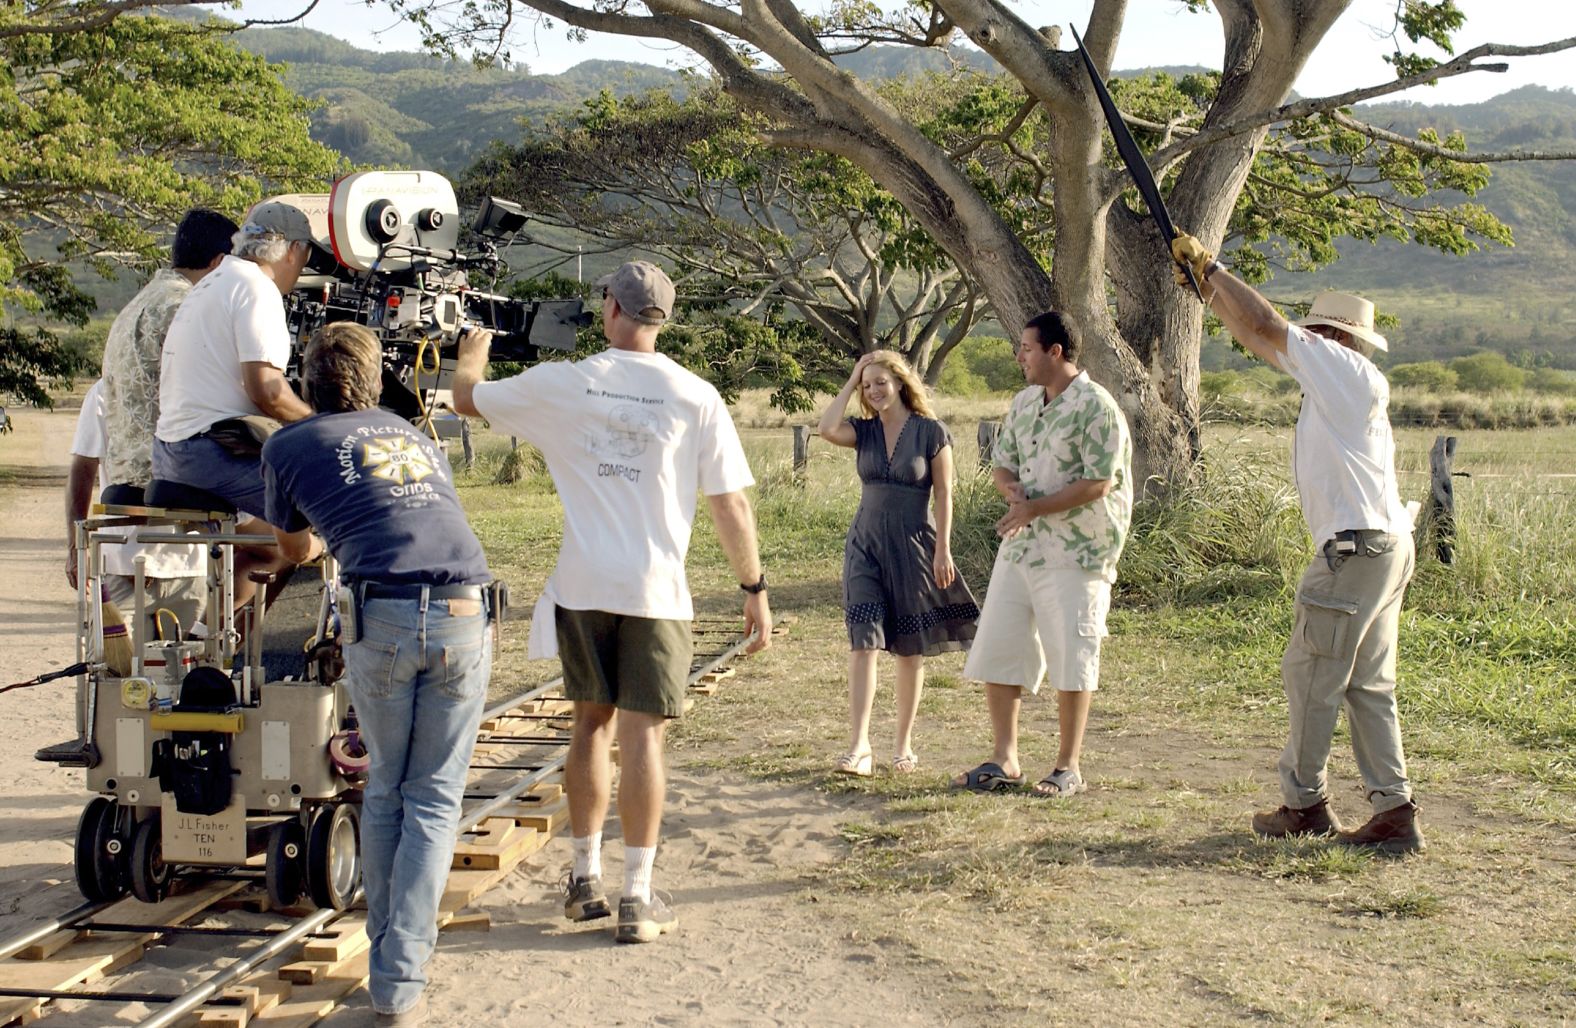 Sandler and Drew Barrymore shoot a scene for the 2004 movie "50 First Dates."